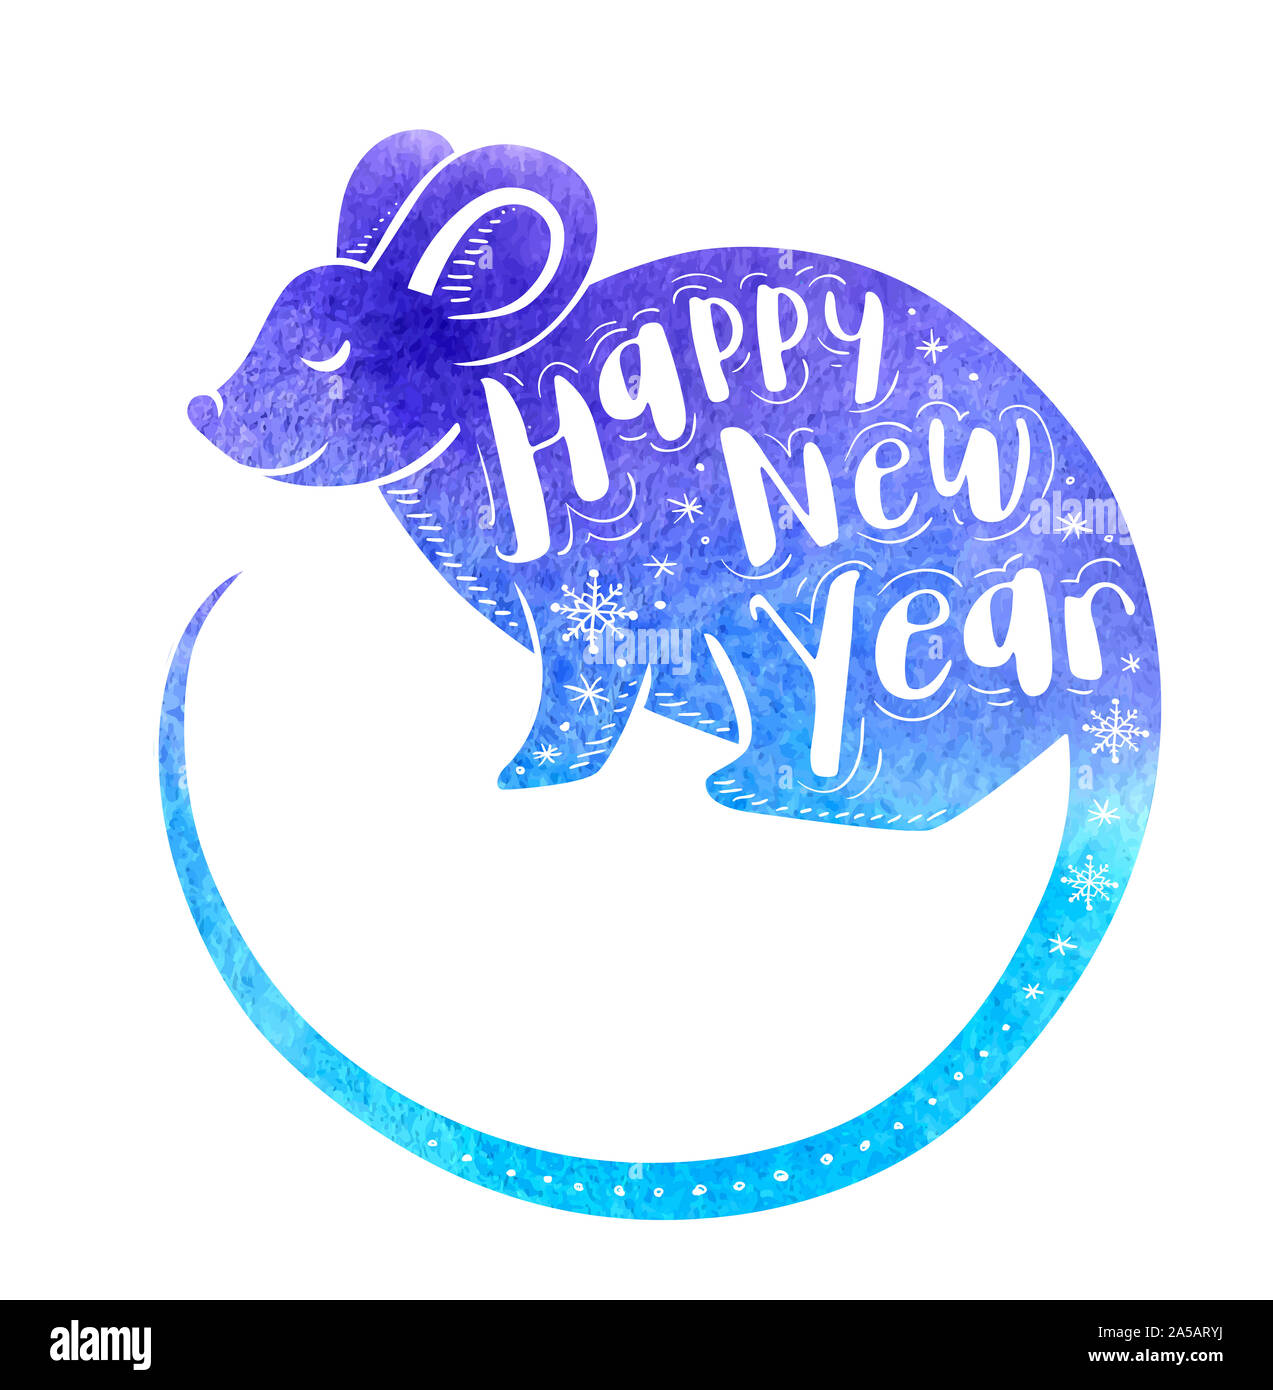 Cute rat symbol of Chinese zodiac for 2020 new year. Blue watercolor silhouette of rat and lettering. Hand drawn illustration Stock Photo